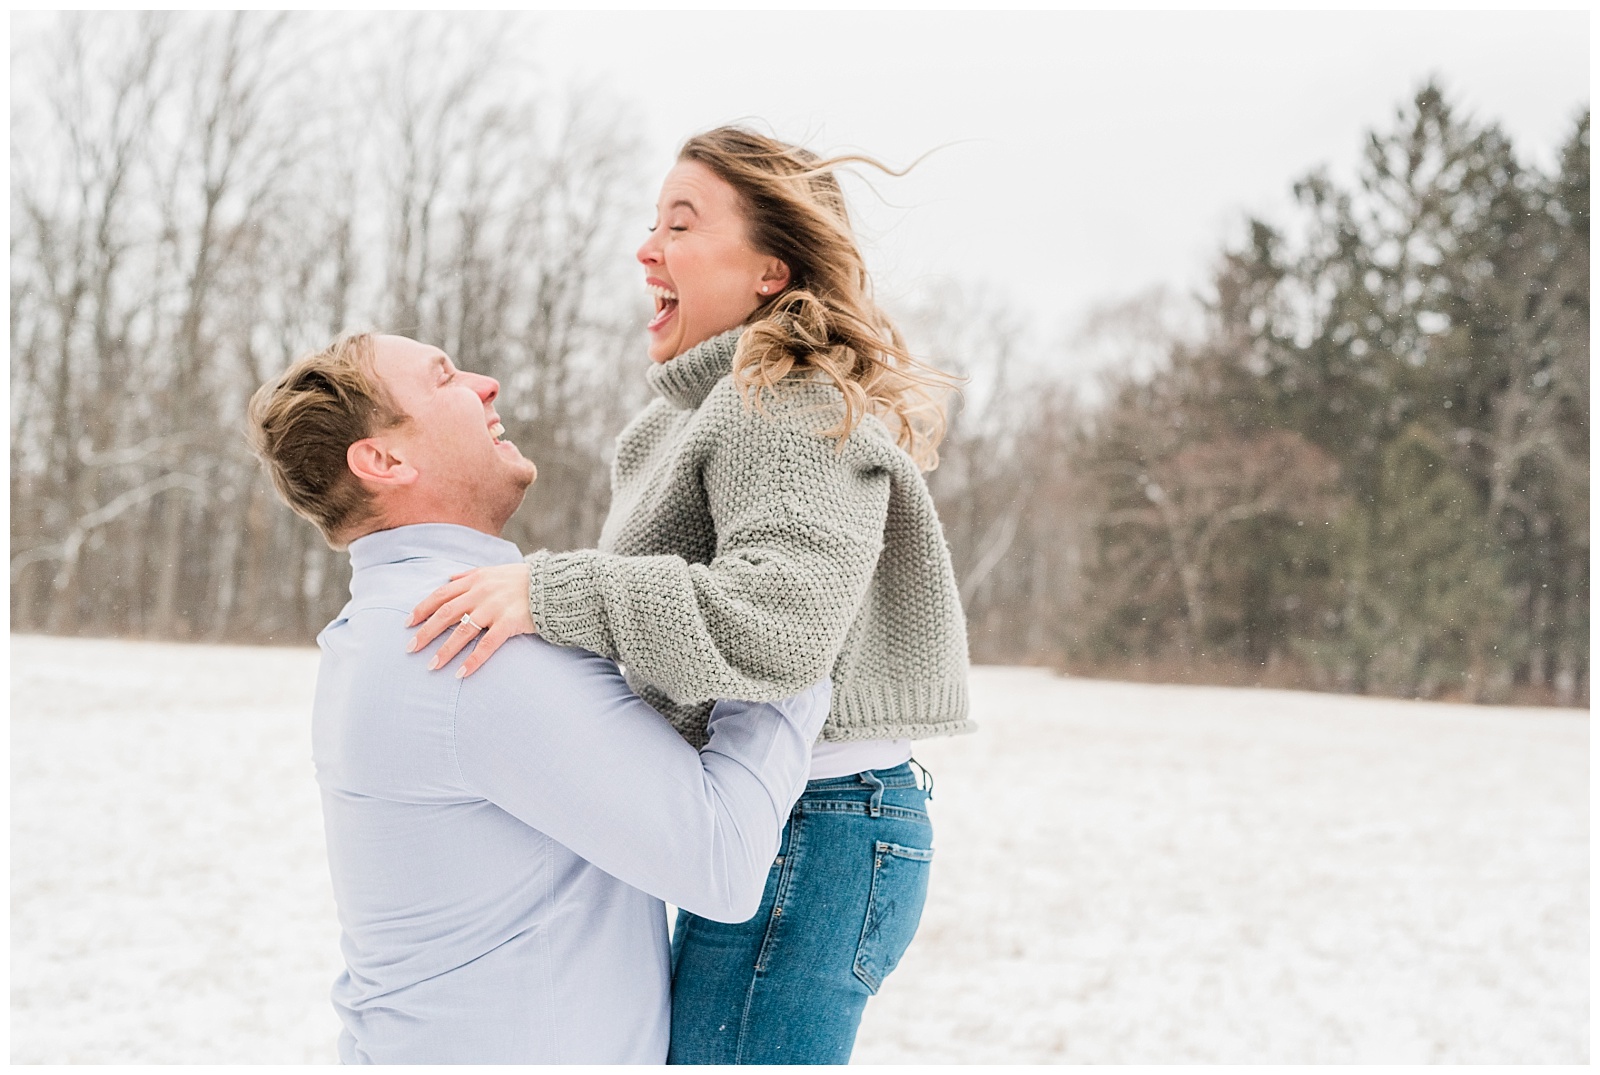 New Jersey Engagement Session, Snowy, Winter, Cozy, Session, Wedding Photographer, Cross Estate Gardens, Snow, Wintry, Light and Airy, Wild, Free, Fun, Lift,